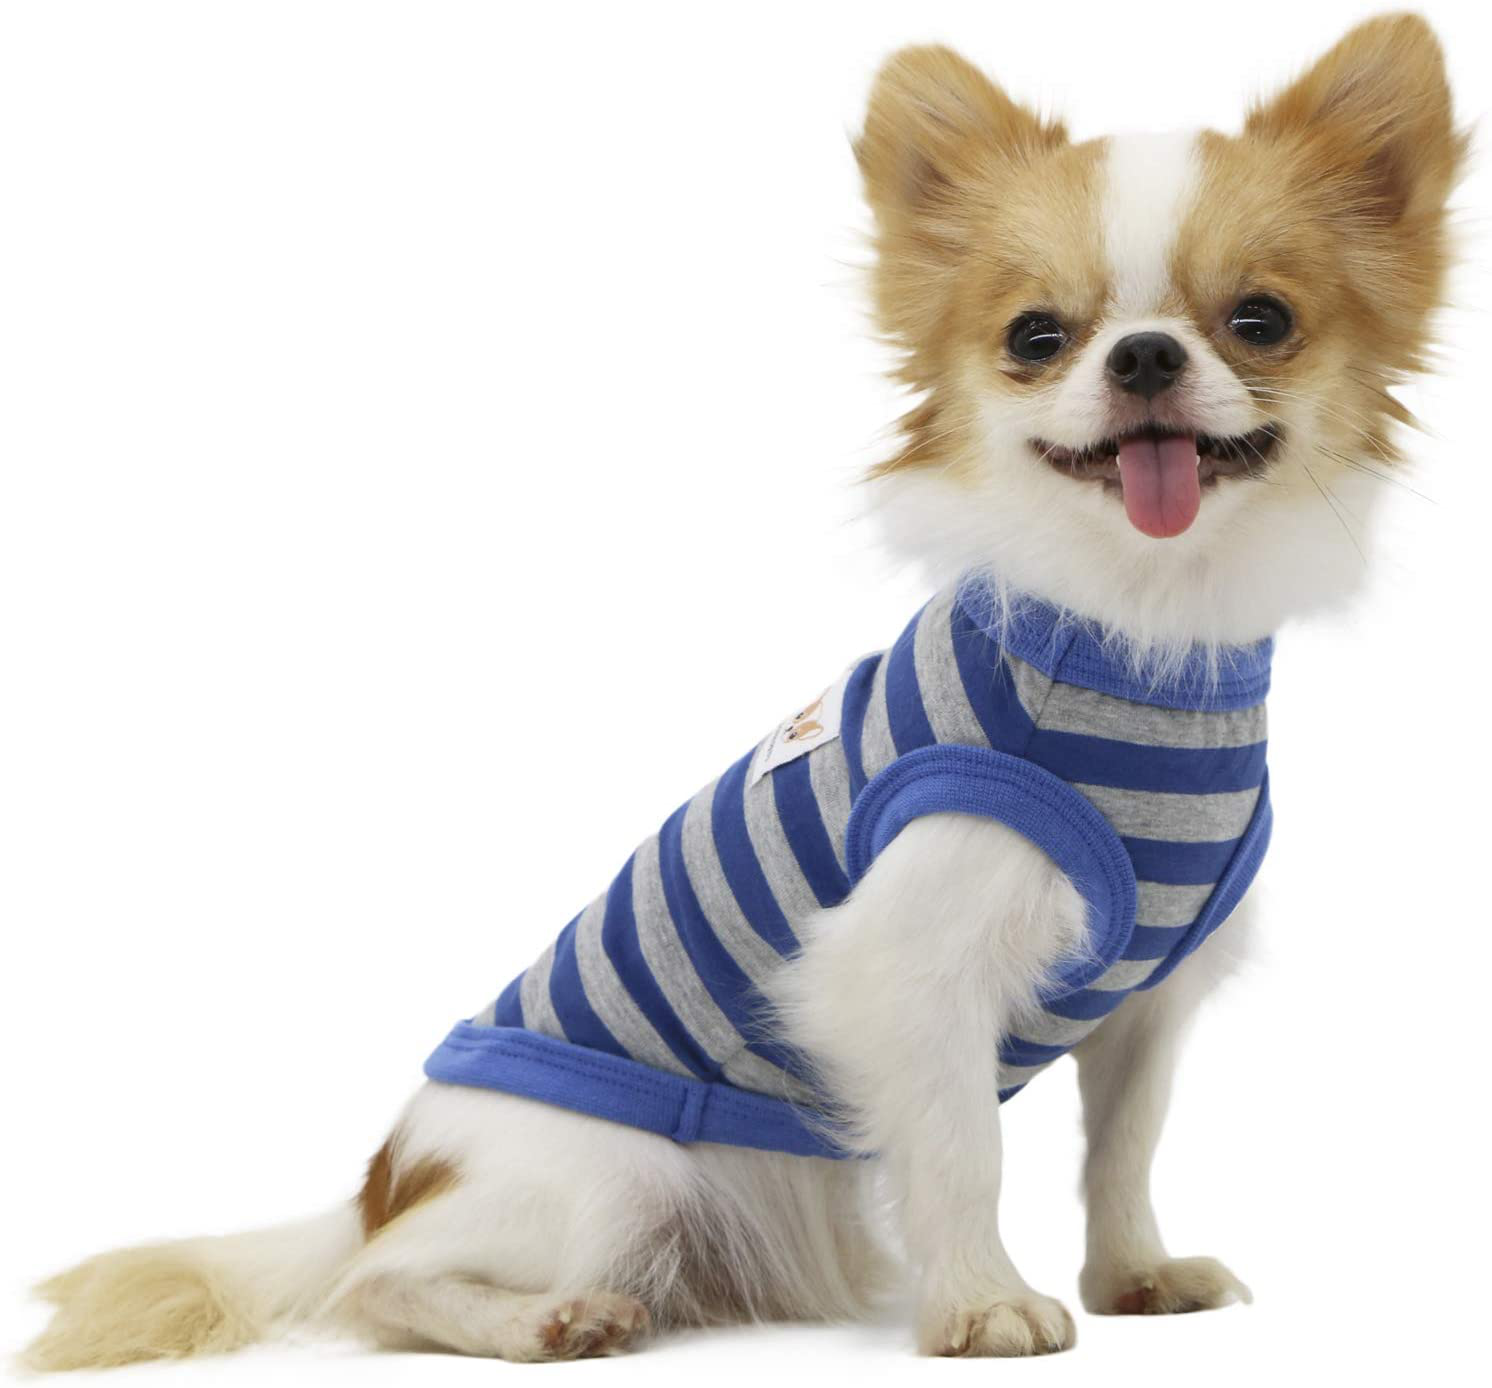 LOPHIPETS 100% Cotton Striped Dog Shirts for Puppy Small Dogs Chihuahua